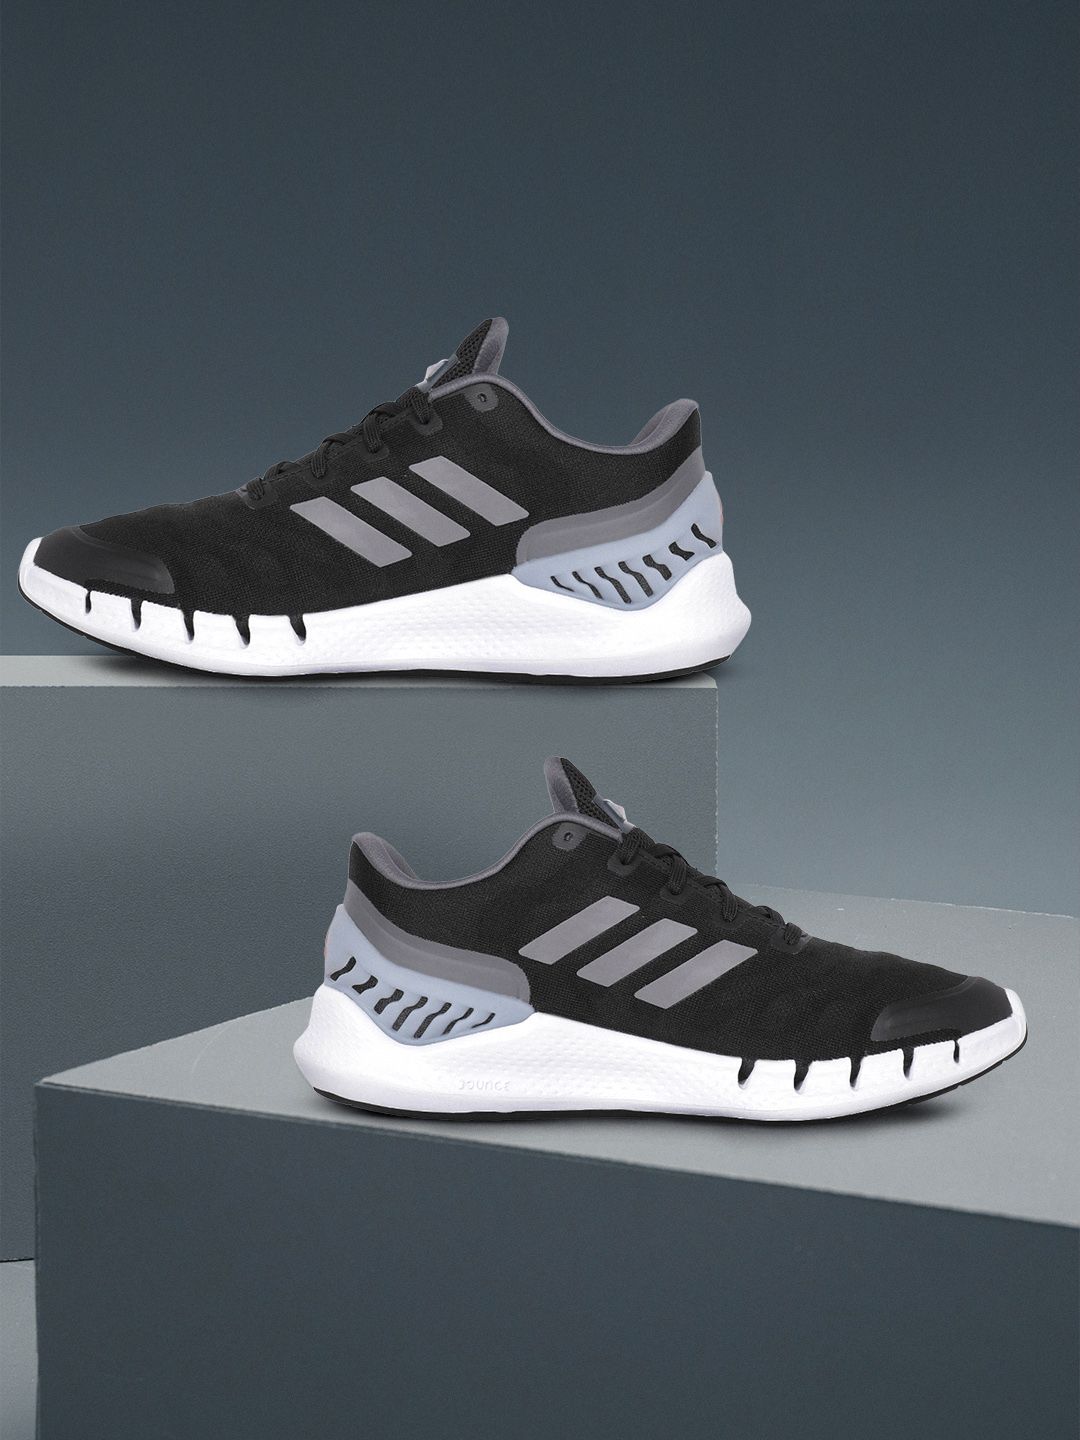 ADIDAS Unisex Black & Grey Woven Design Climacool Ventania Running Shoes Price in India